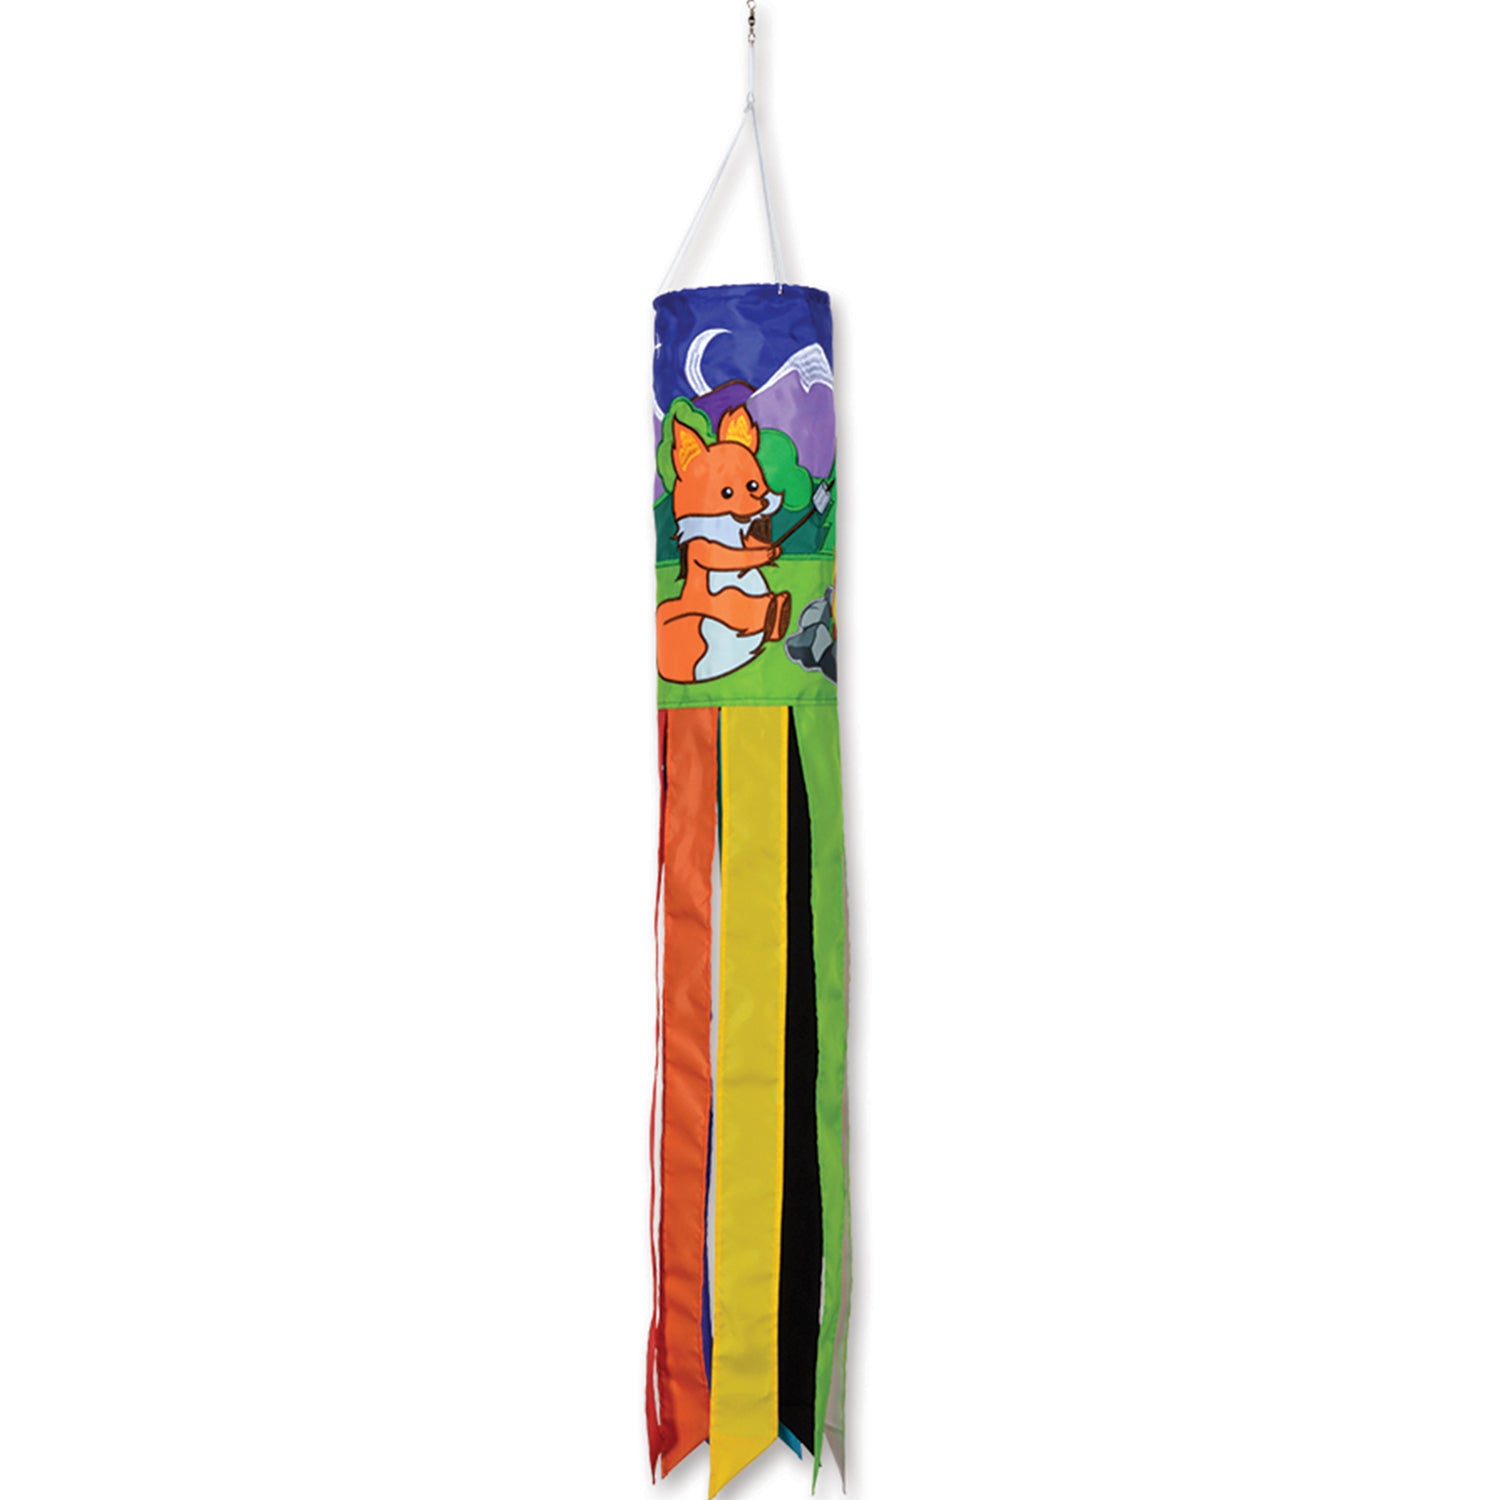 Premier Camping Critters Windsock (40")